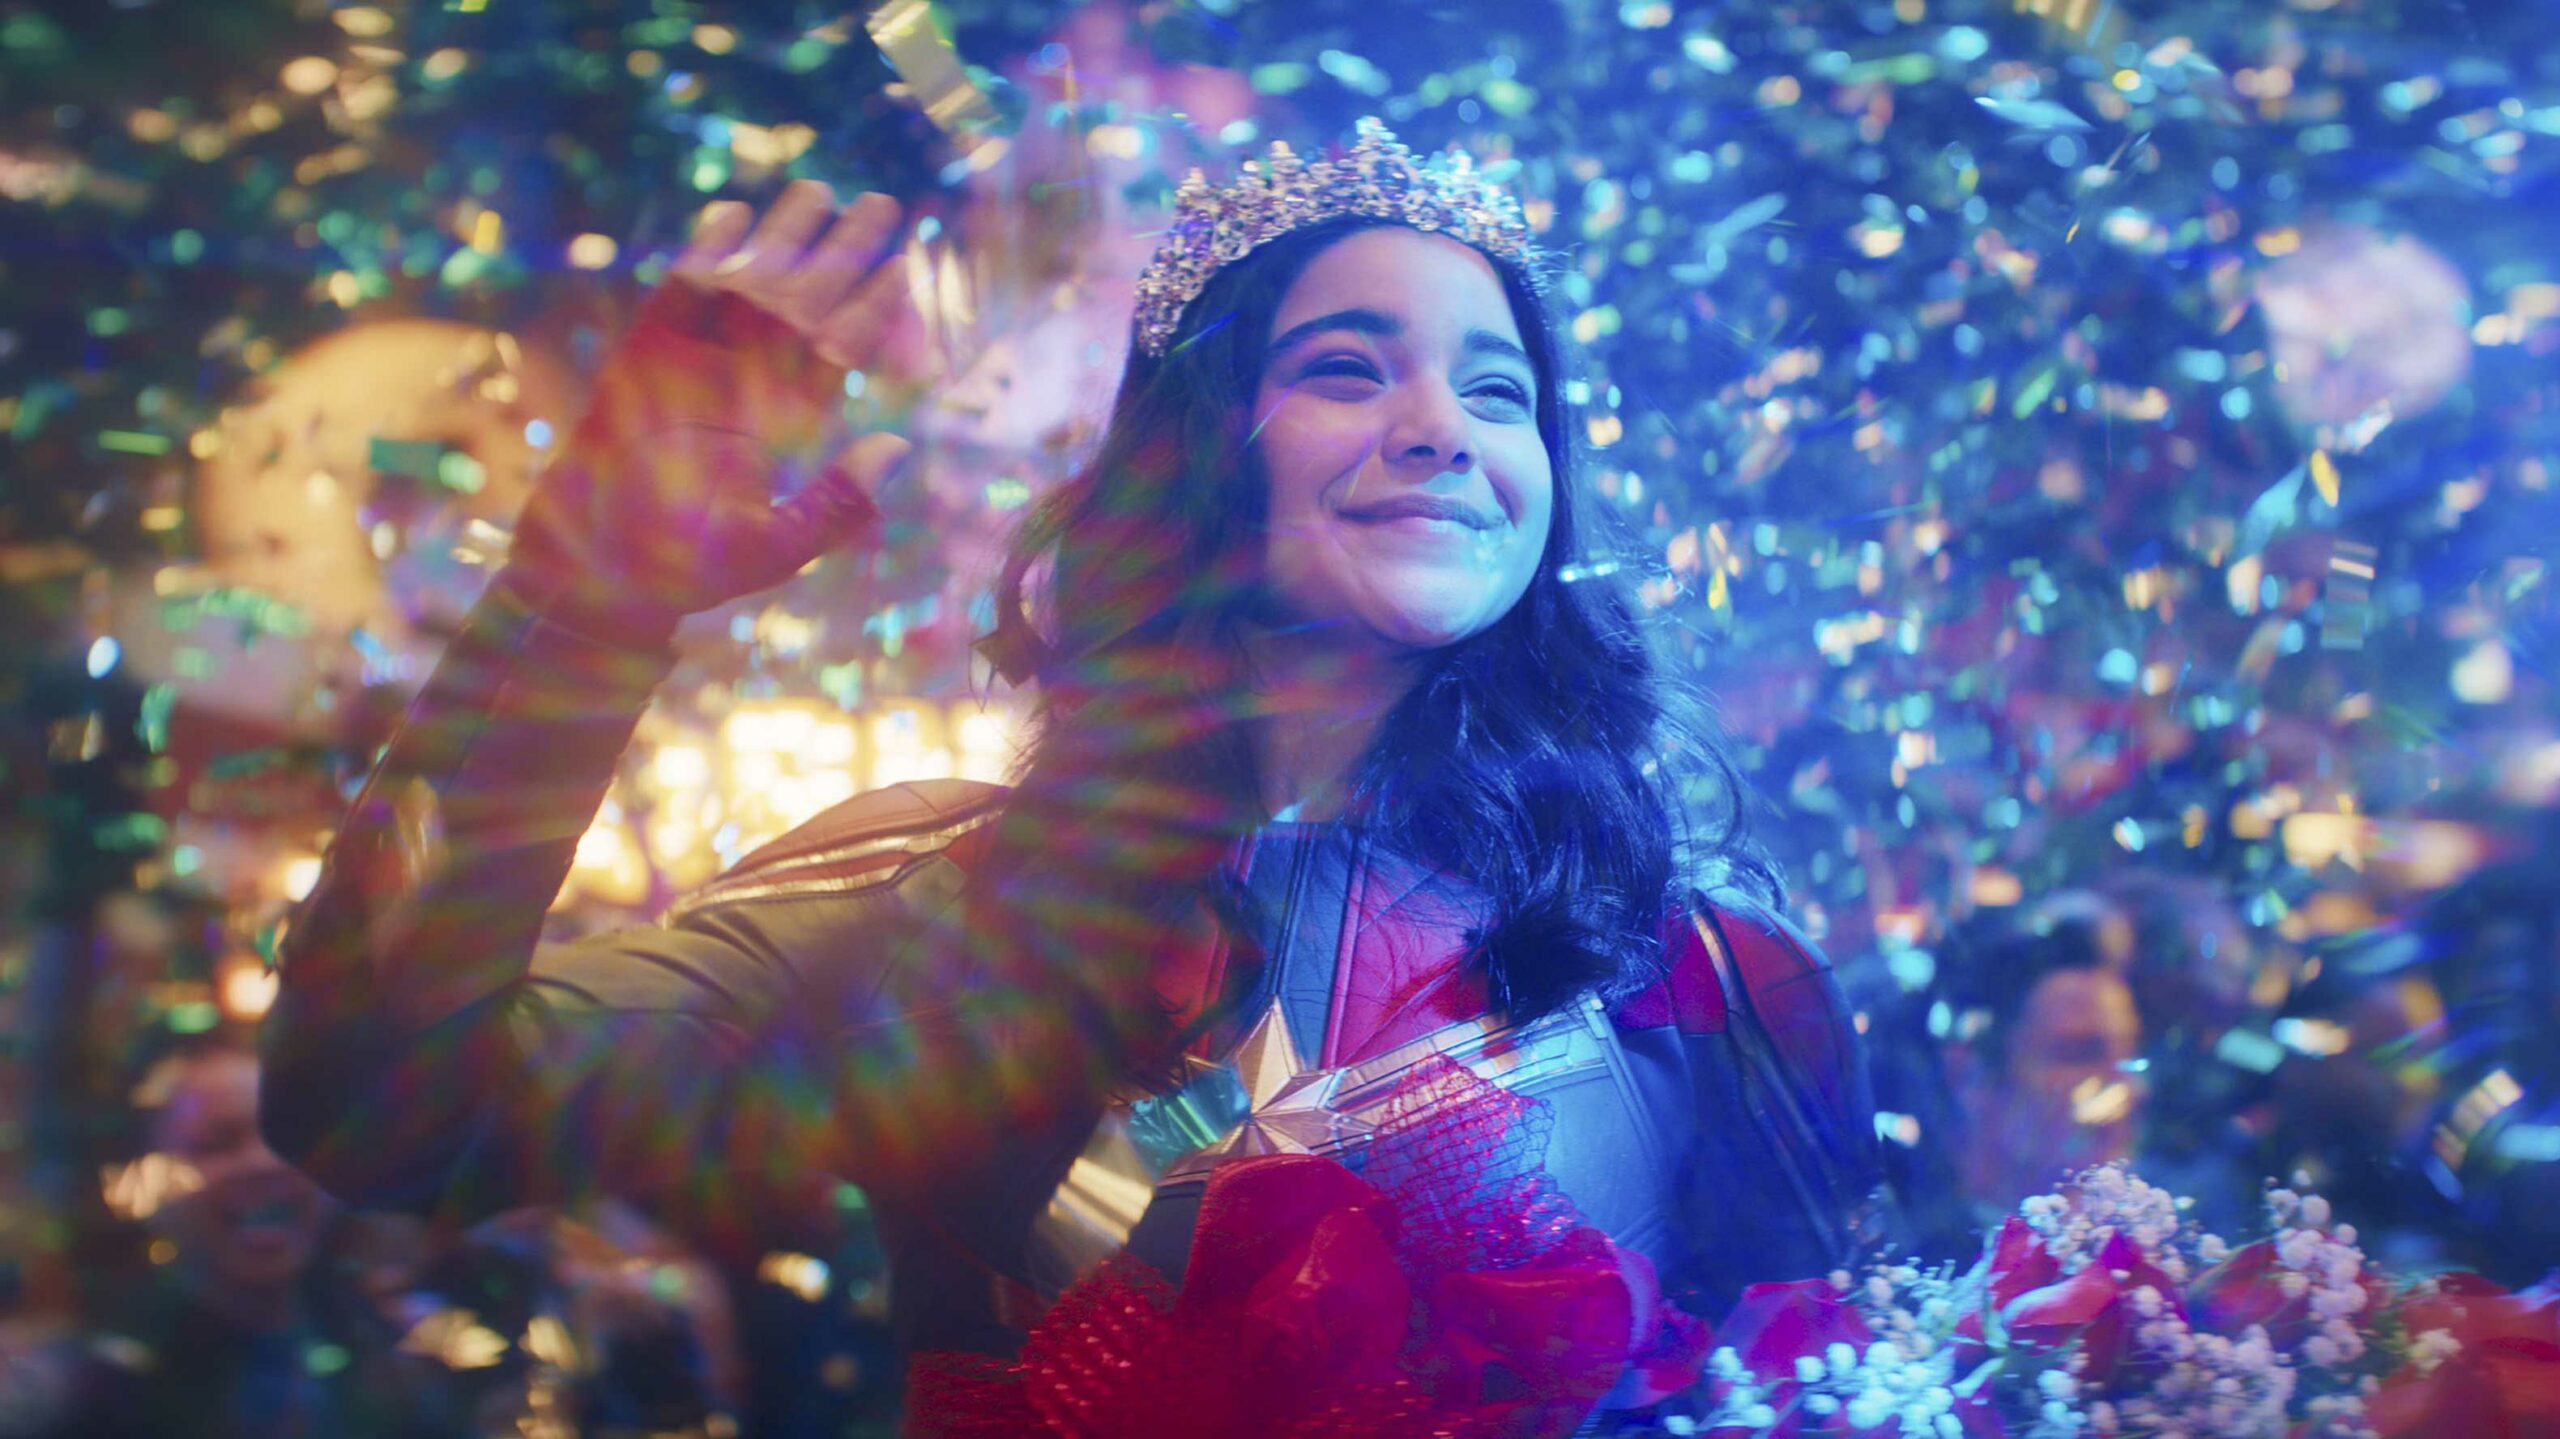 Iman Vellani as Kamala Khan/Ms. Marvel in the Disney+ series of the same name. She's smiling and waving as she receives flowers and confetti rains around her.